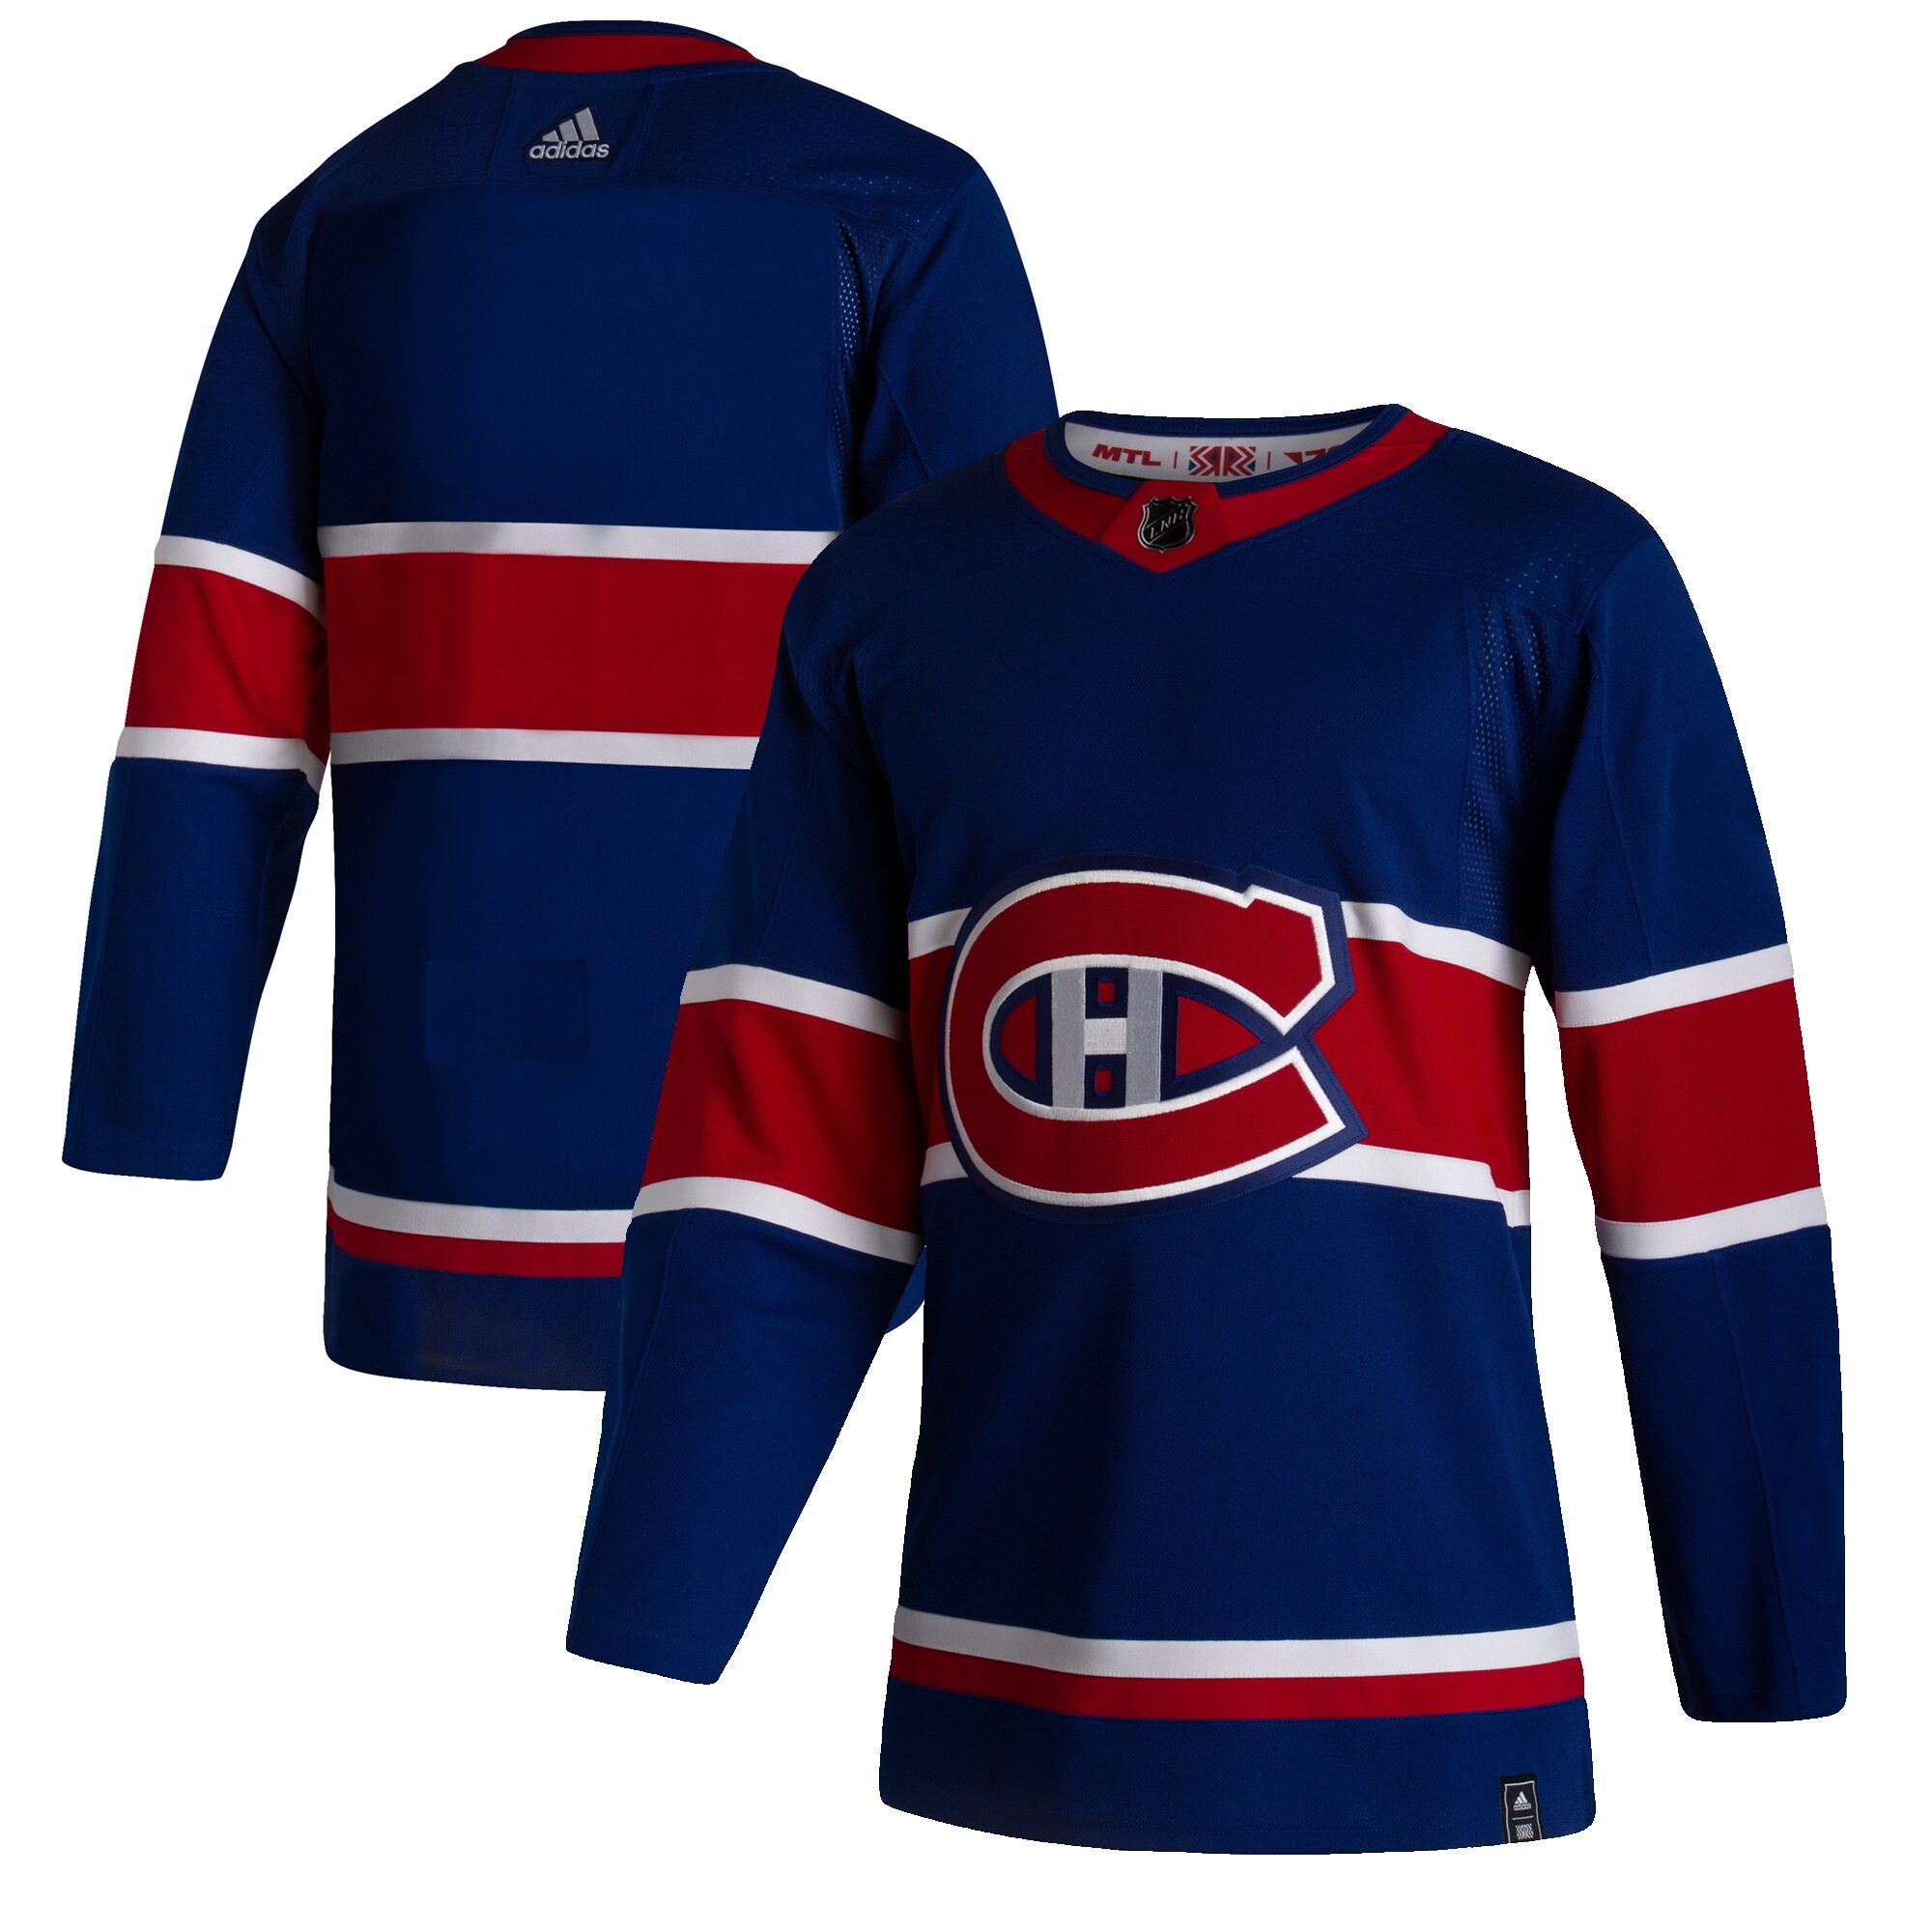 Montreal Candiens fans need to check out these new â€˜Reverse Retroâ€™ î€€jerseysî€